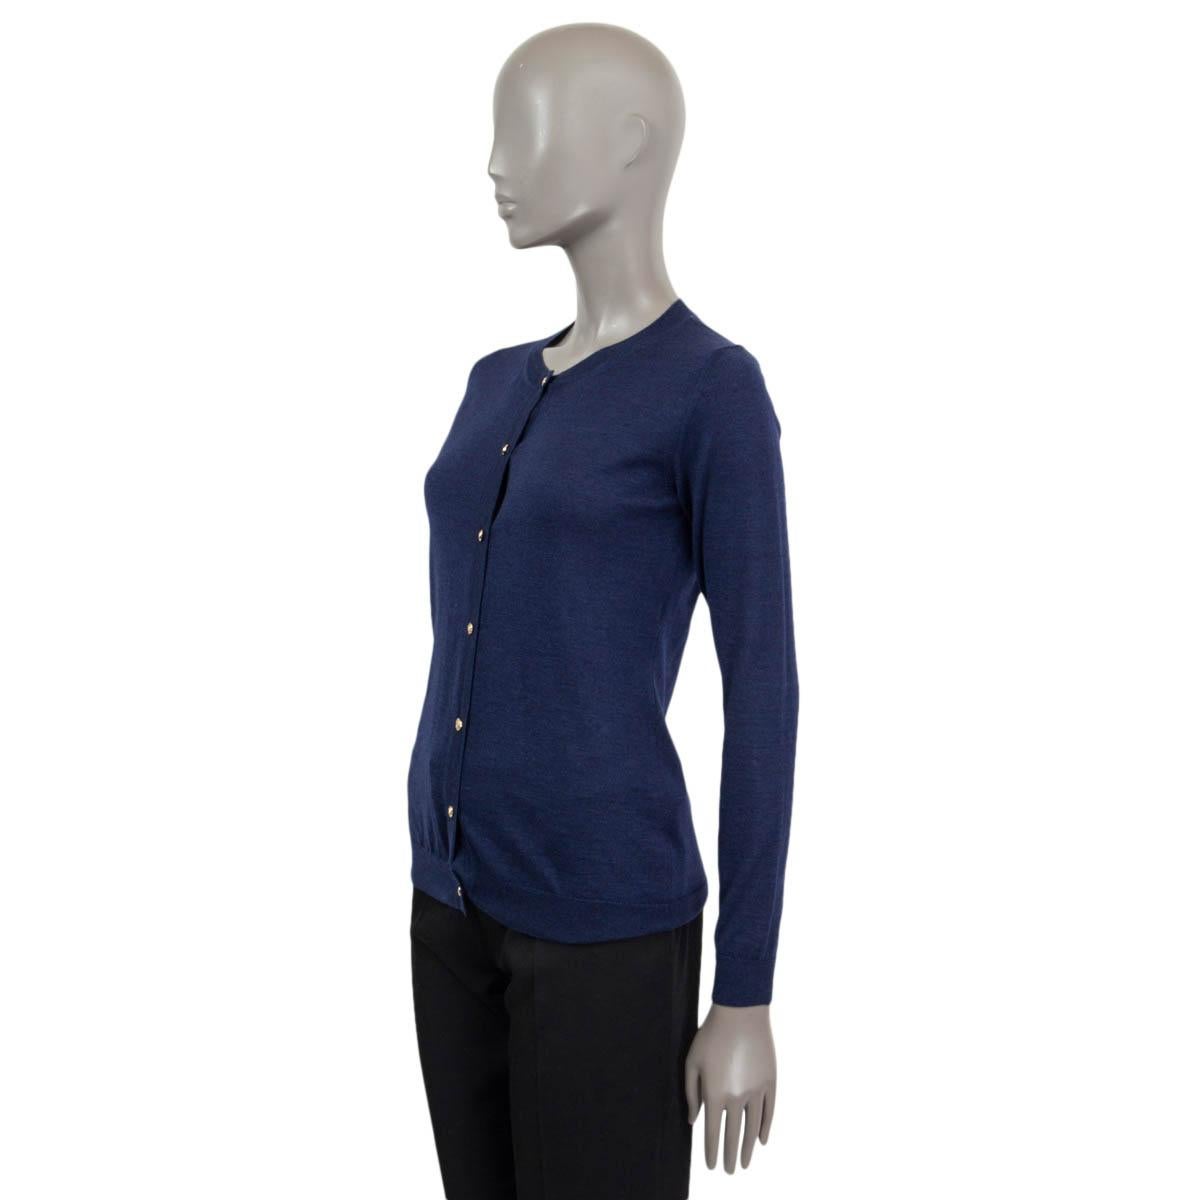 VERSACE navy blue cashmere & silk BUTTON FRONT CREWNECK Cardigan Sweater 40 S In Excellent Condition For Sale In Zürich, CH